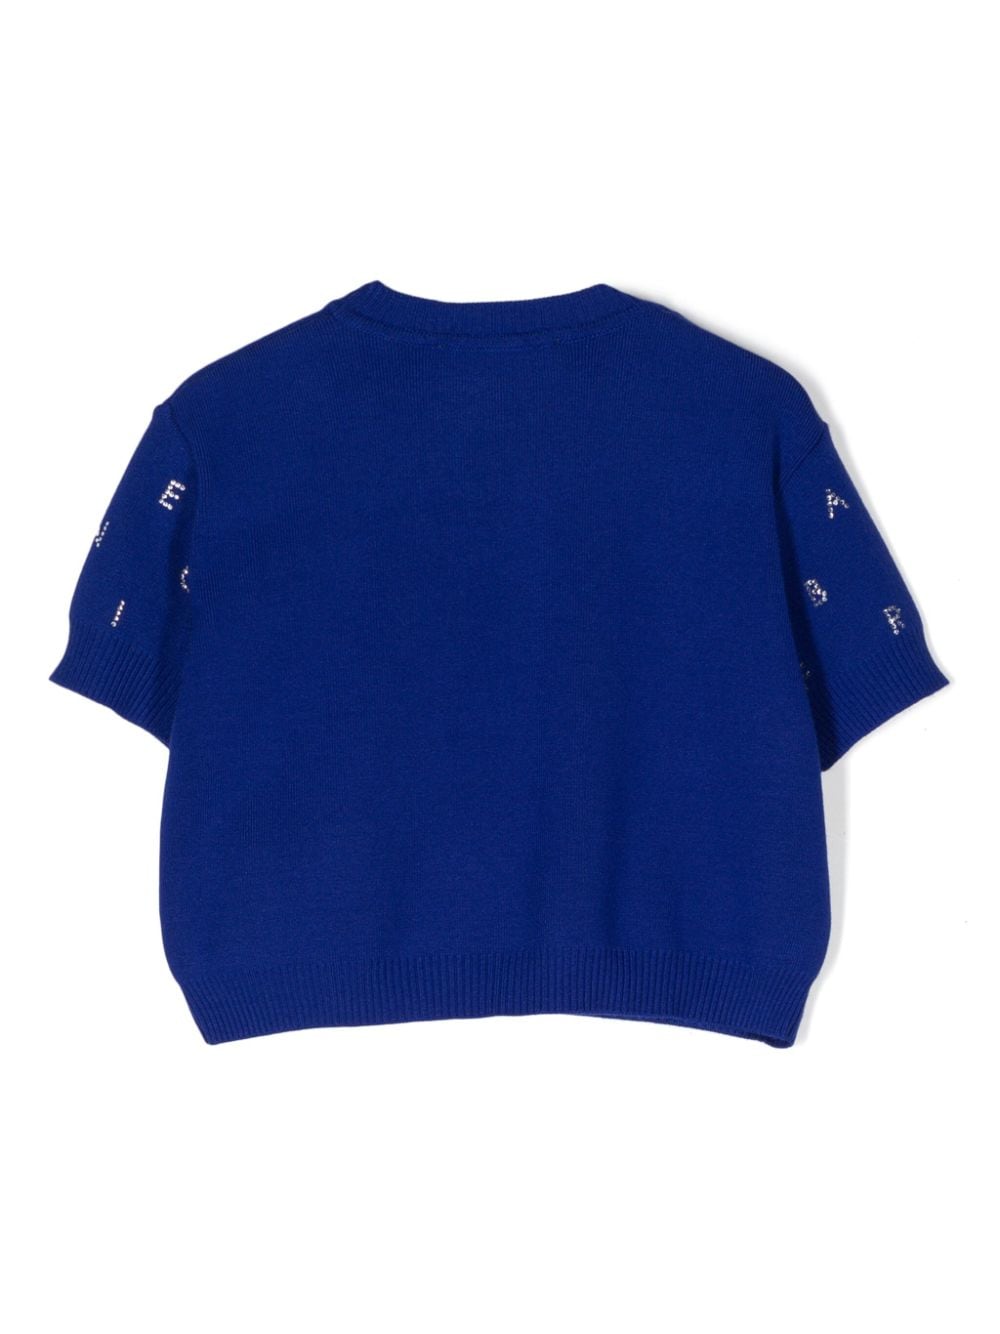 Blue top for girls with logo